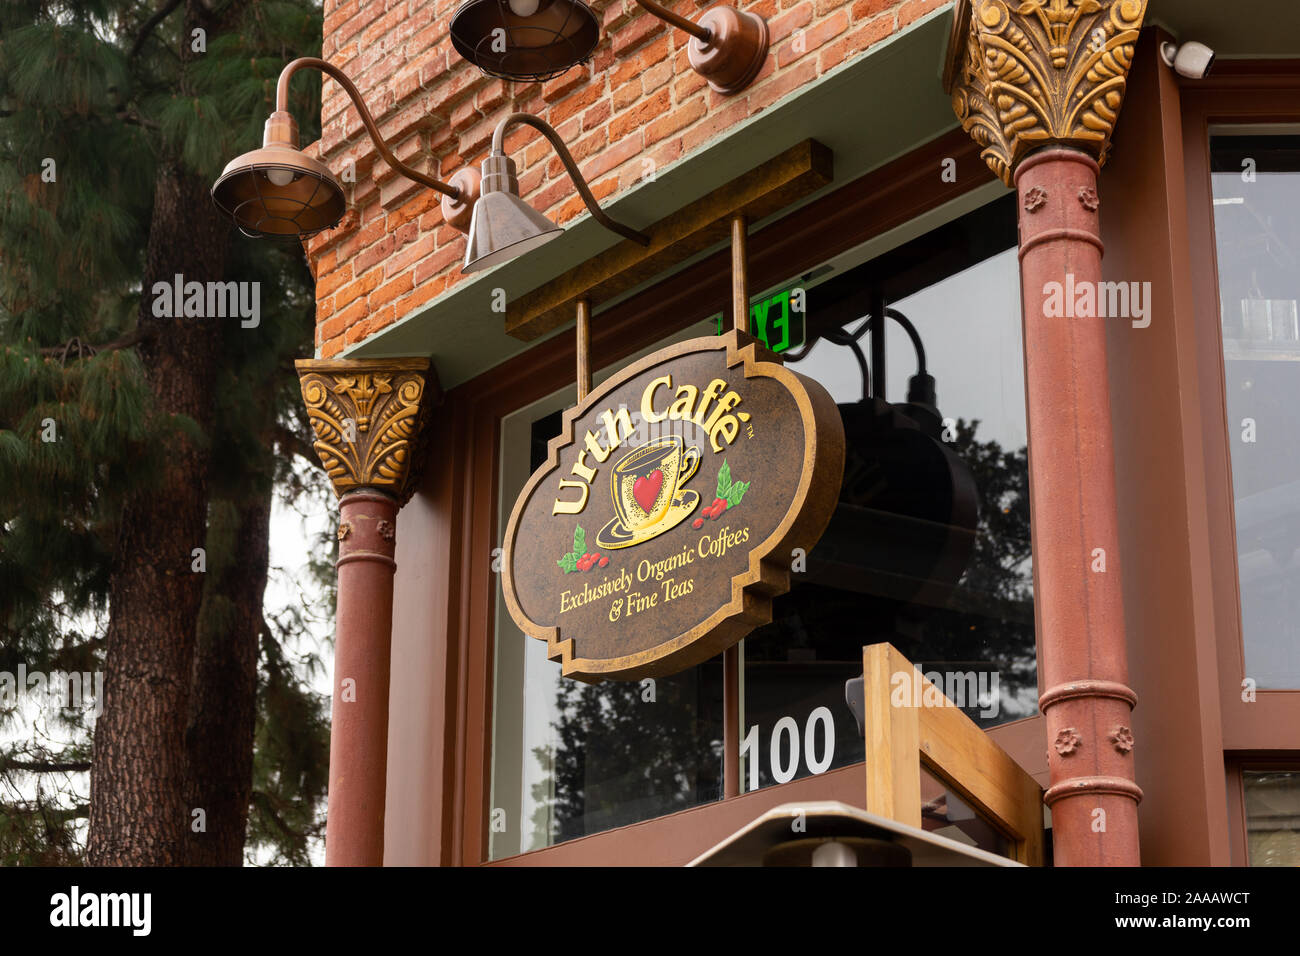 Orange, CA / USA - November 14, 2019: Business signage for Urth Caffe located in the old town area in the City of Orange, California. Stock Photo